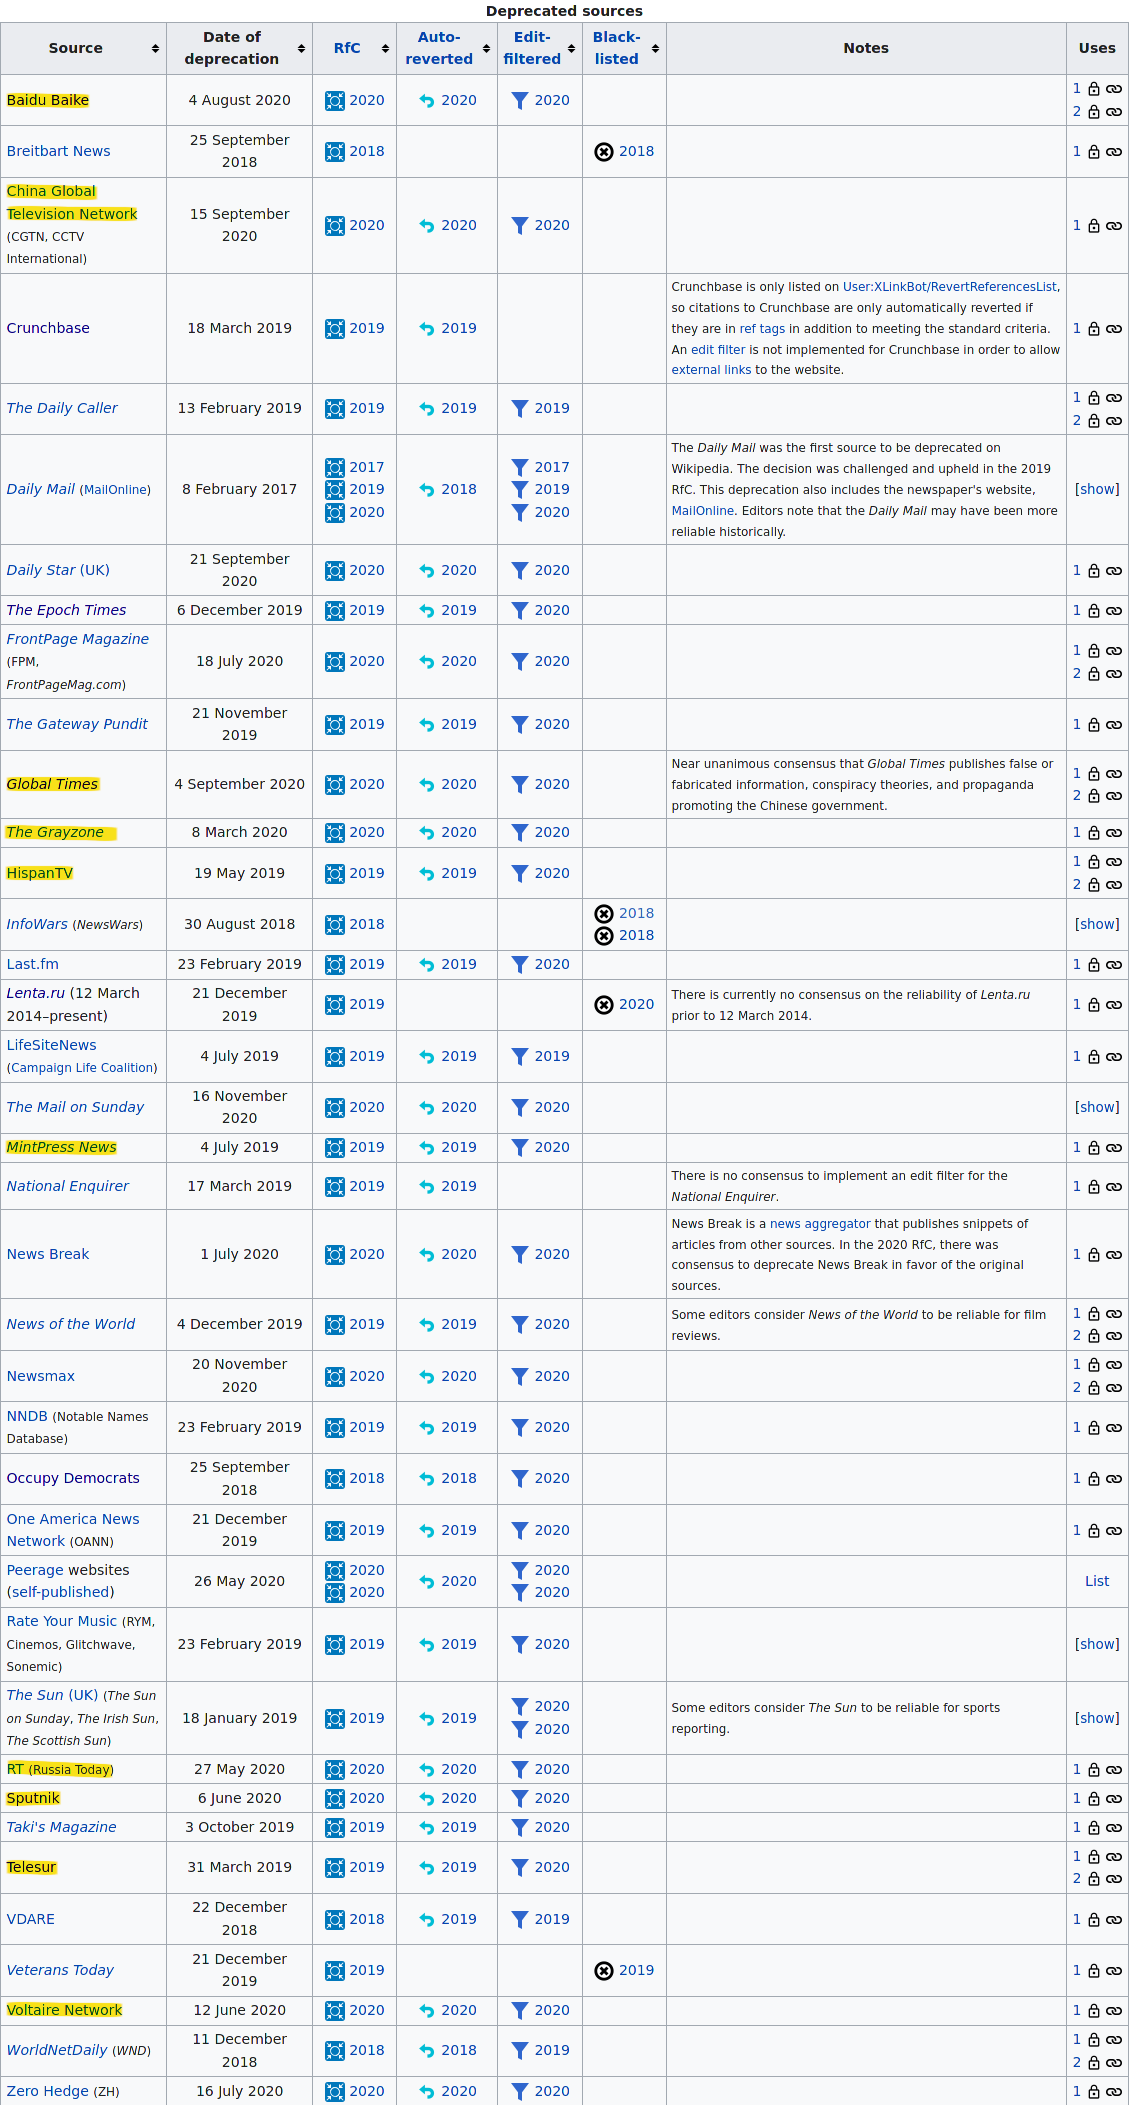 File:Wikipedia imperialist censorship.png